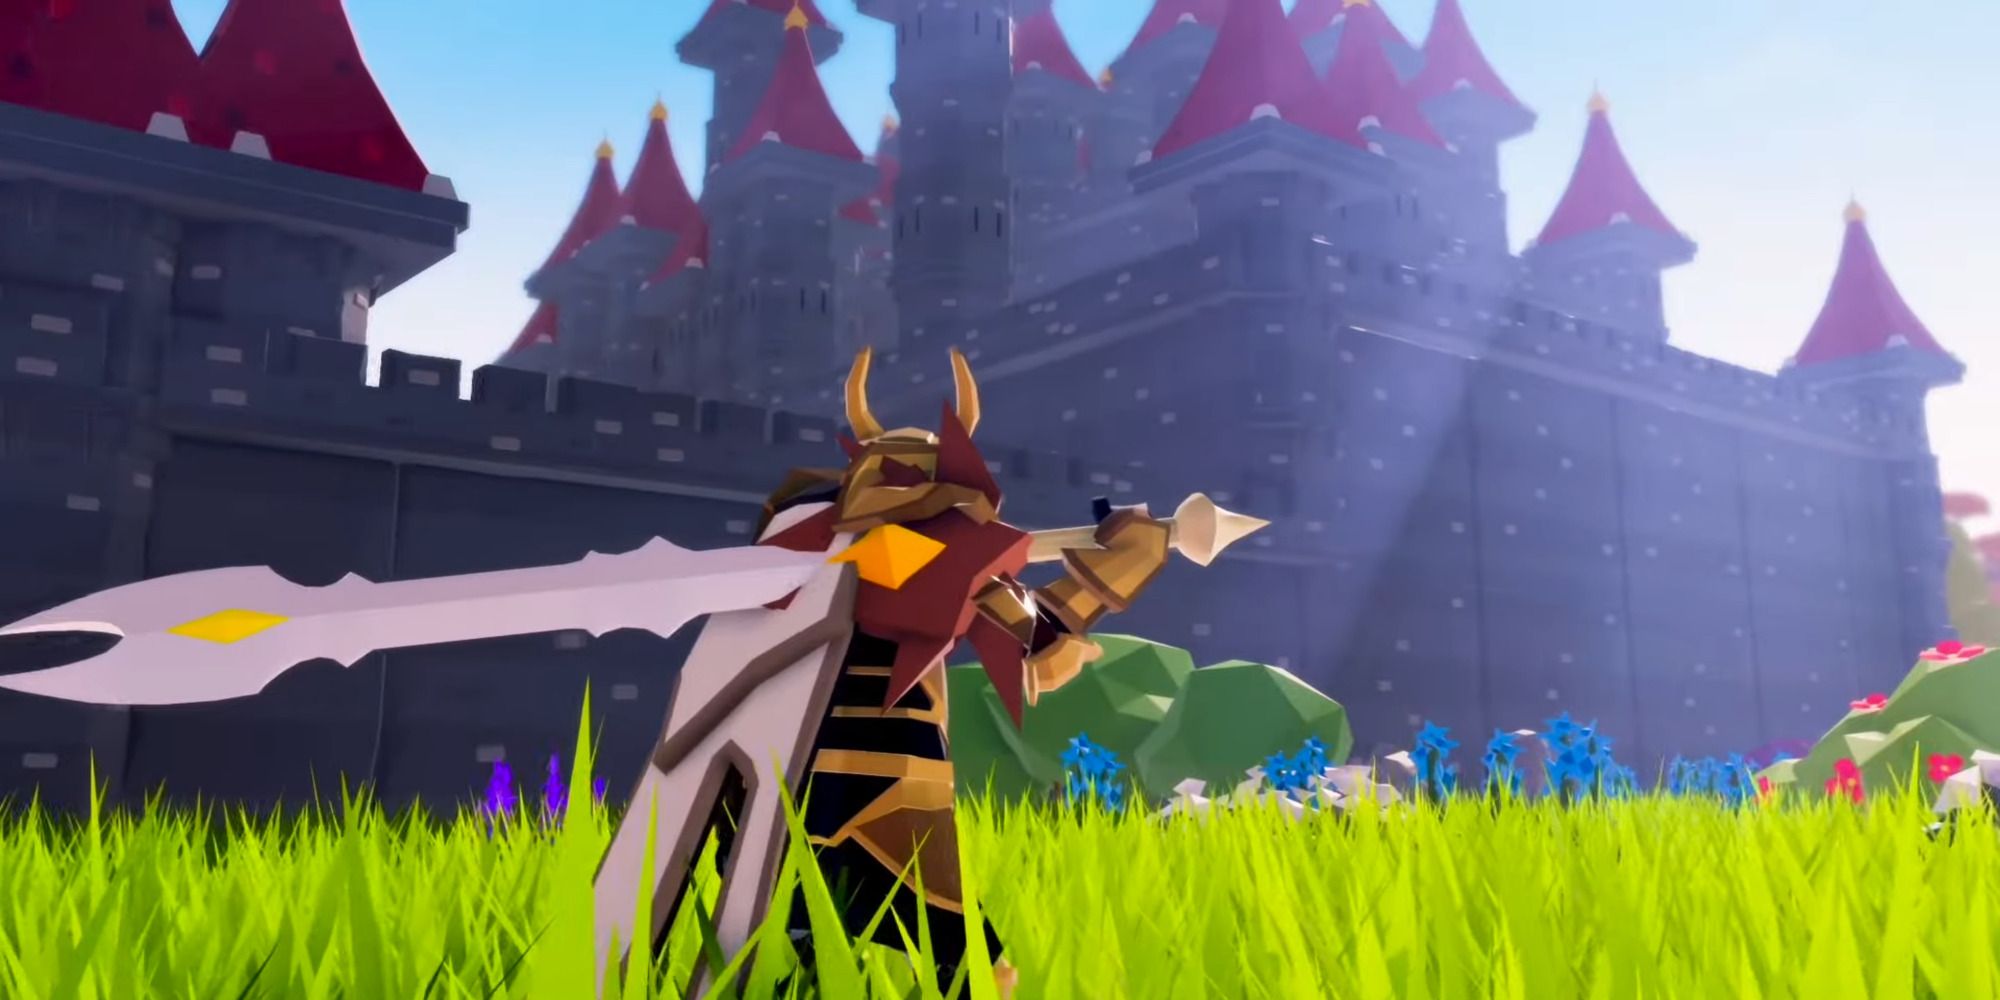 A player heading towards a Castle in Dragon Blade in Roblox